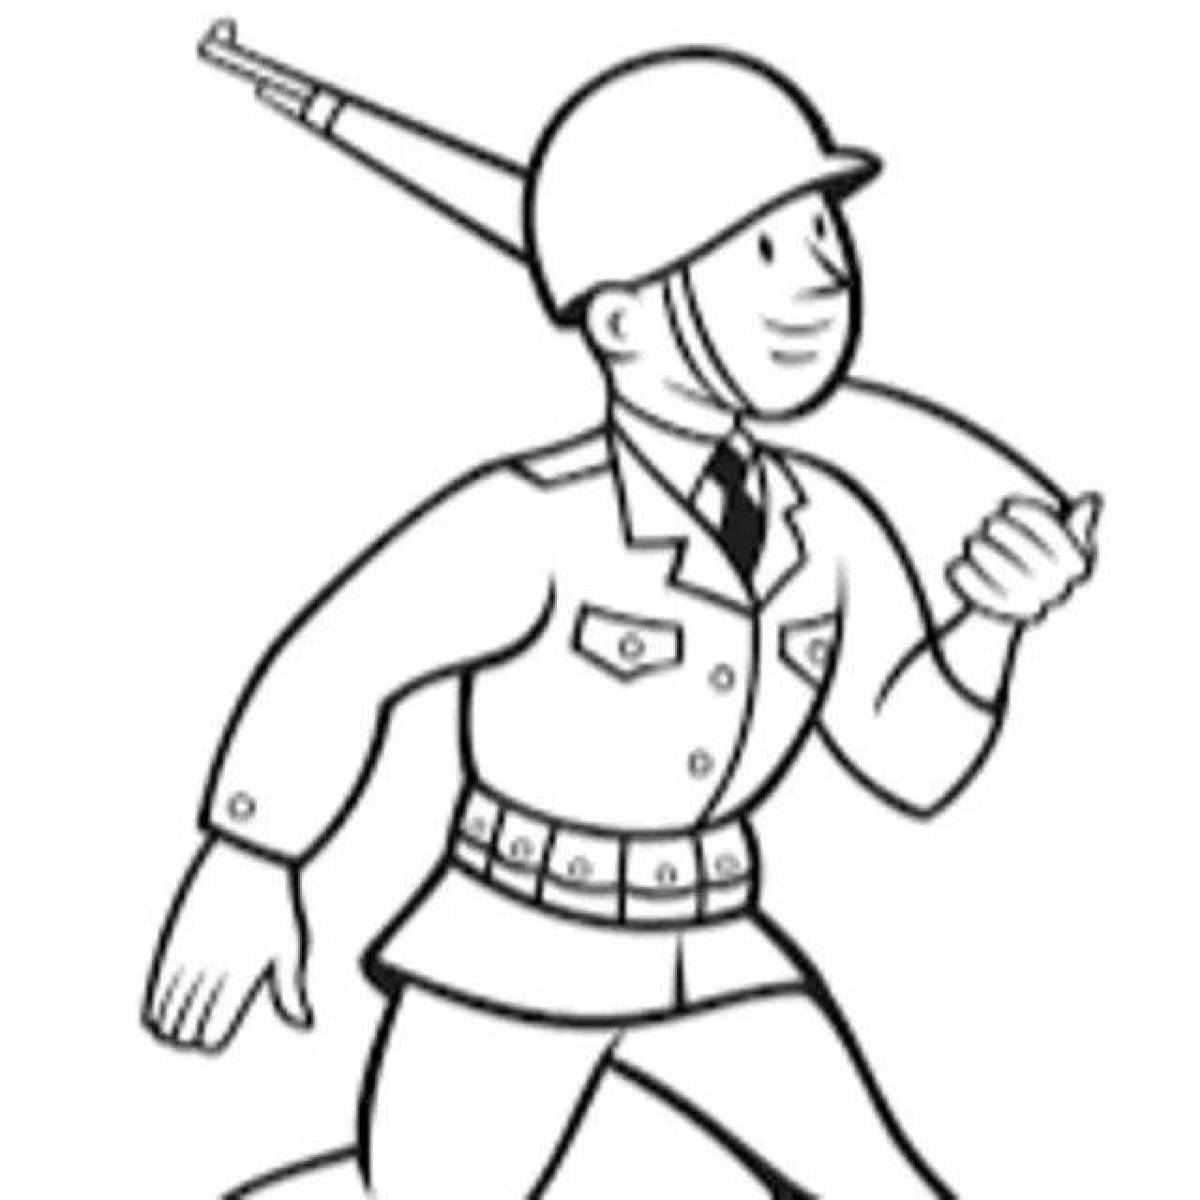 Soldier coloring for kids